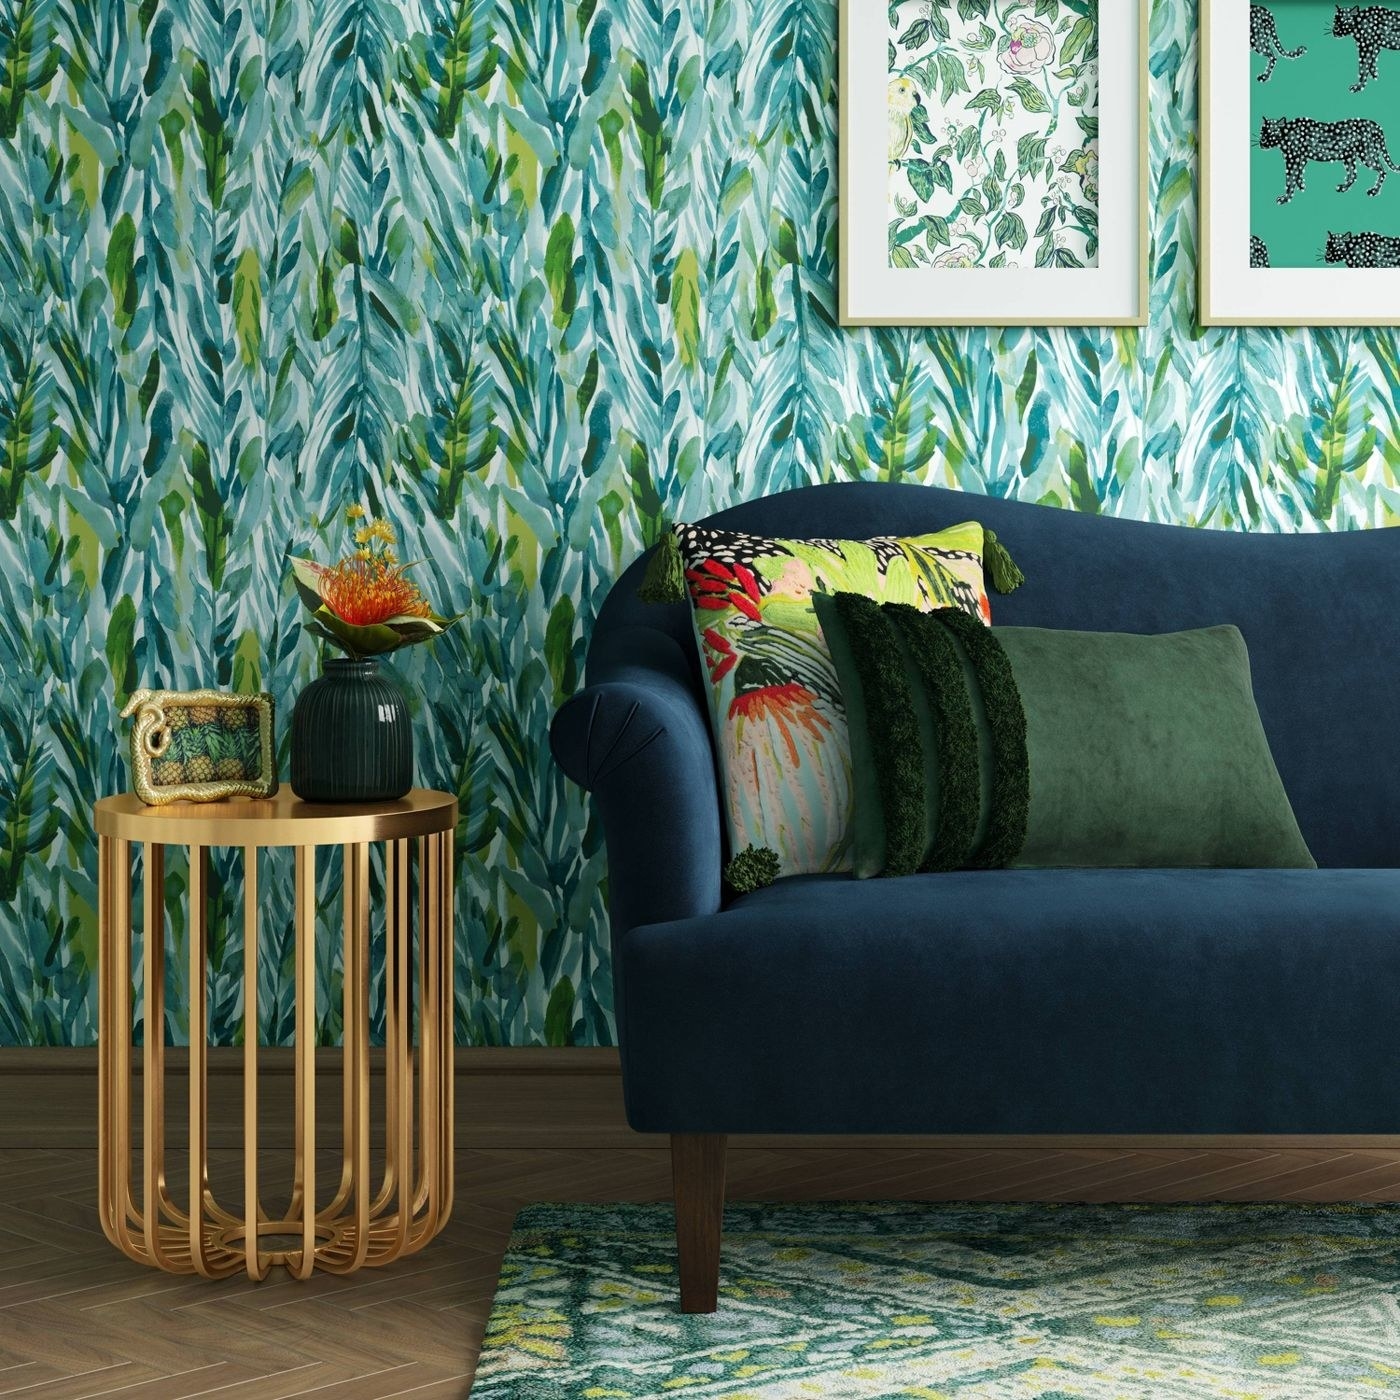 A gold side table next to a navy blue couch with a matching leaf rug and wallpaper background.